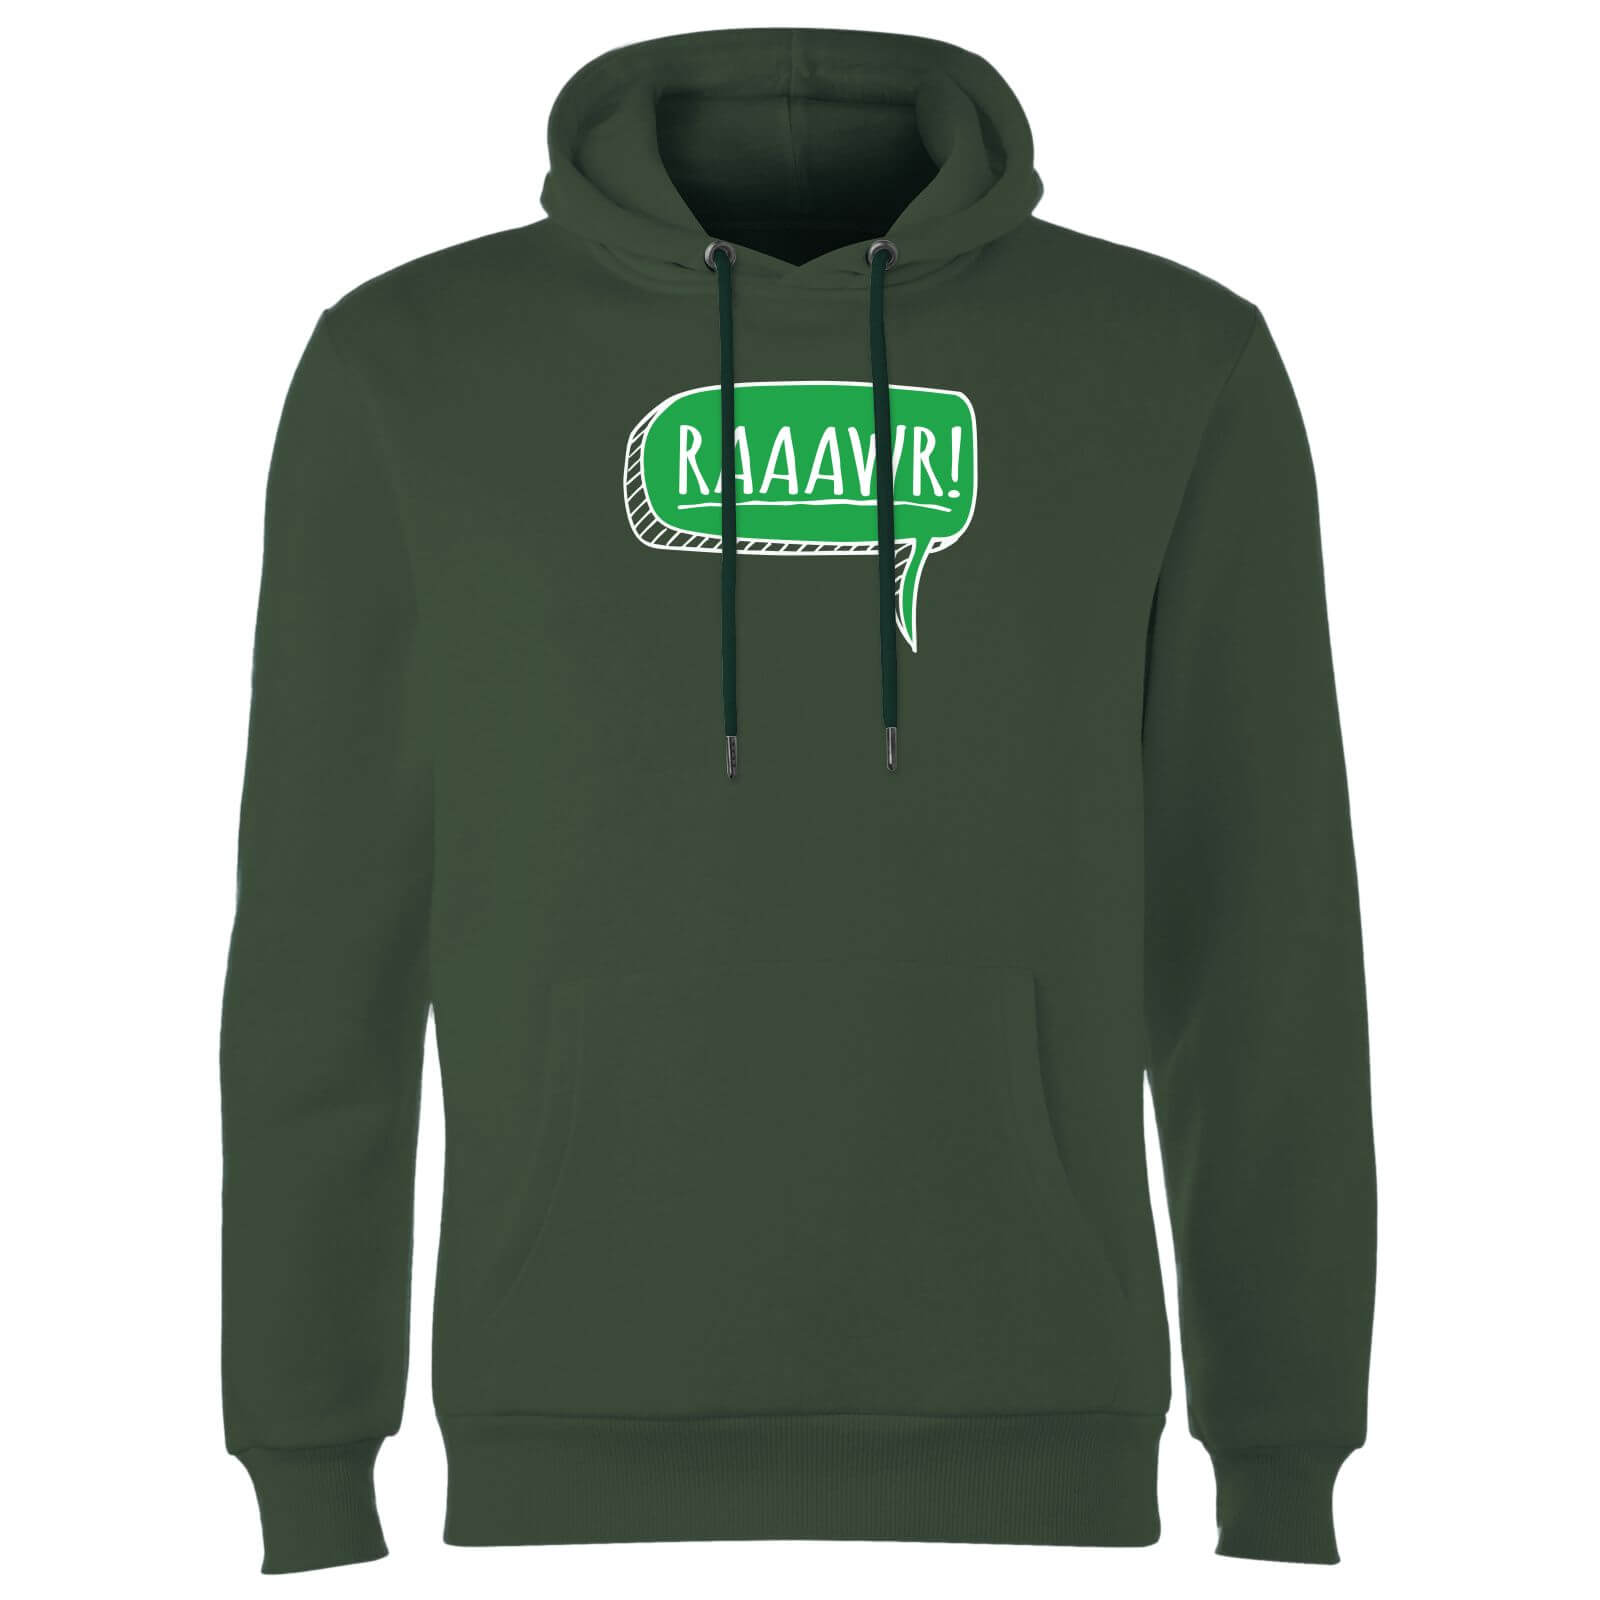 Raaawr Hoodie - Forest Green - S - Forest Green